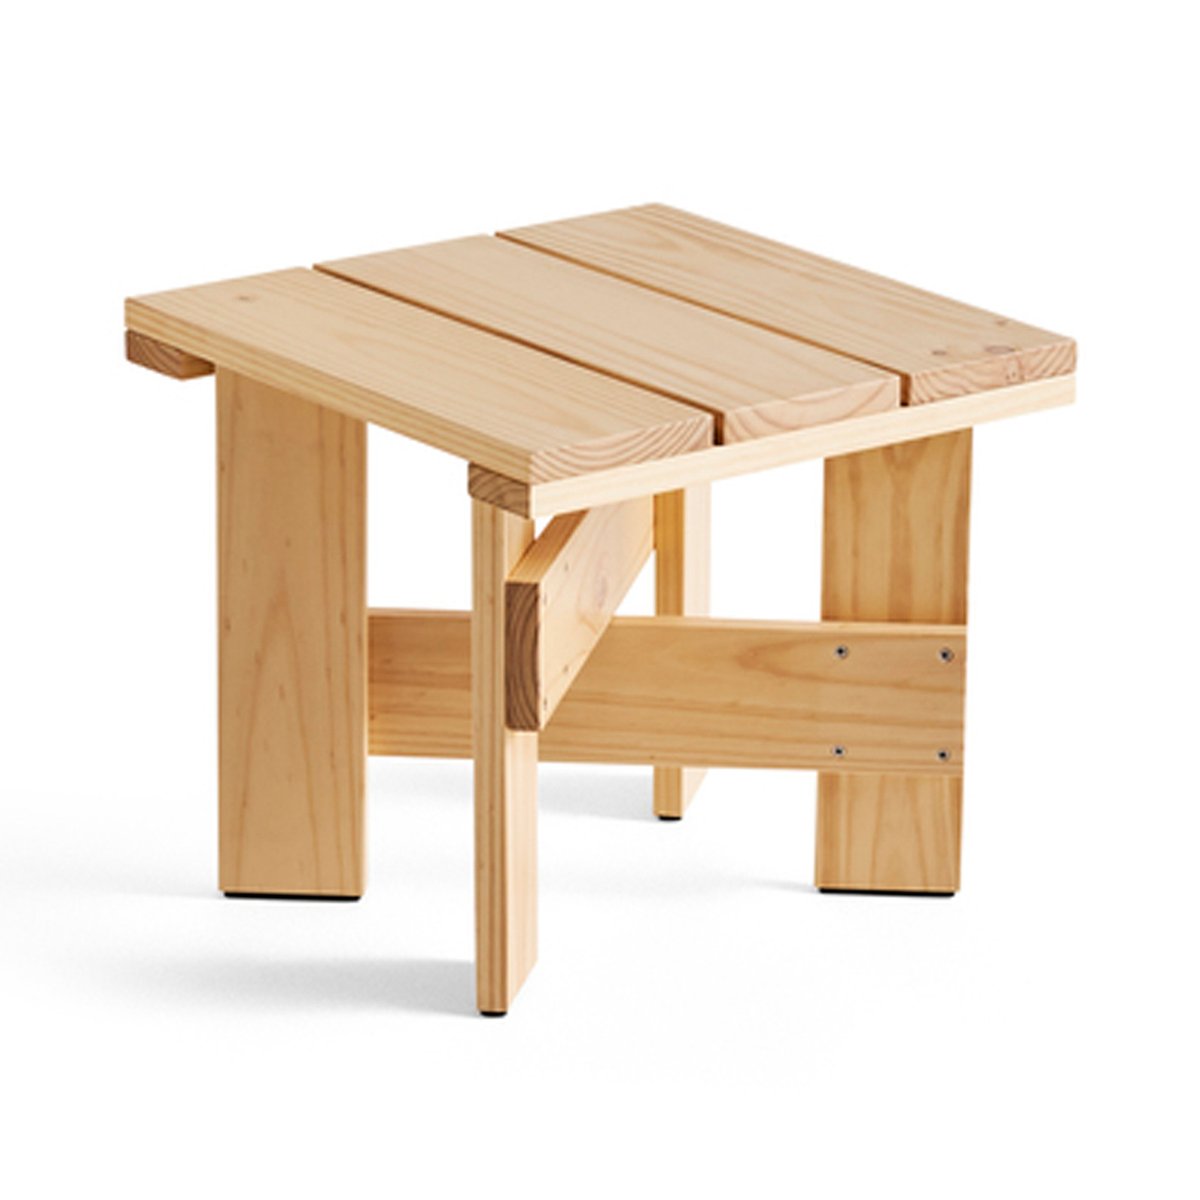 HAY Crate Low Table tafel 45x45x40 cm gelakt sparrenhout Water-based lacquered pinewood